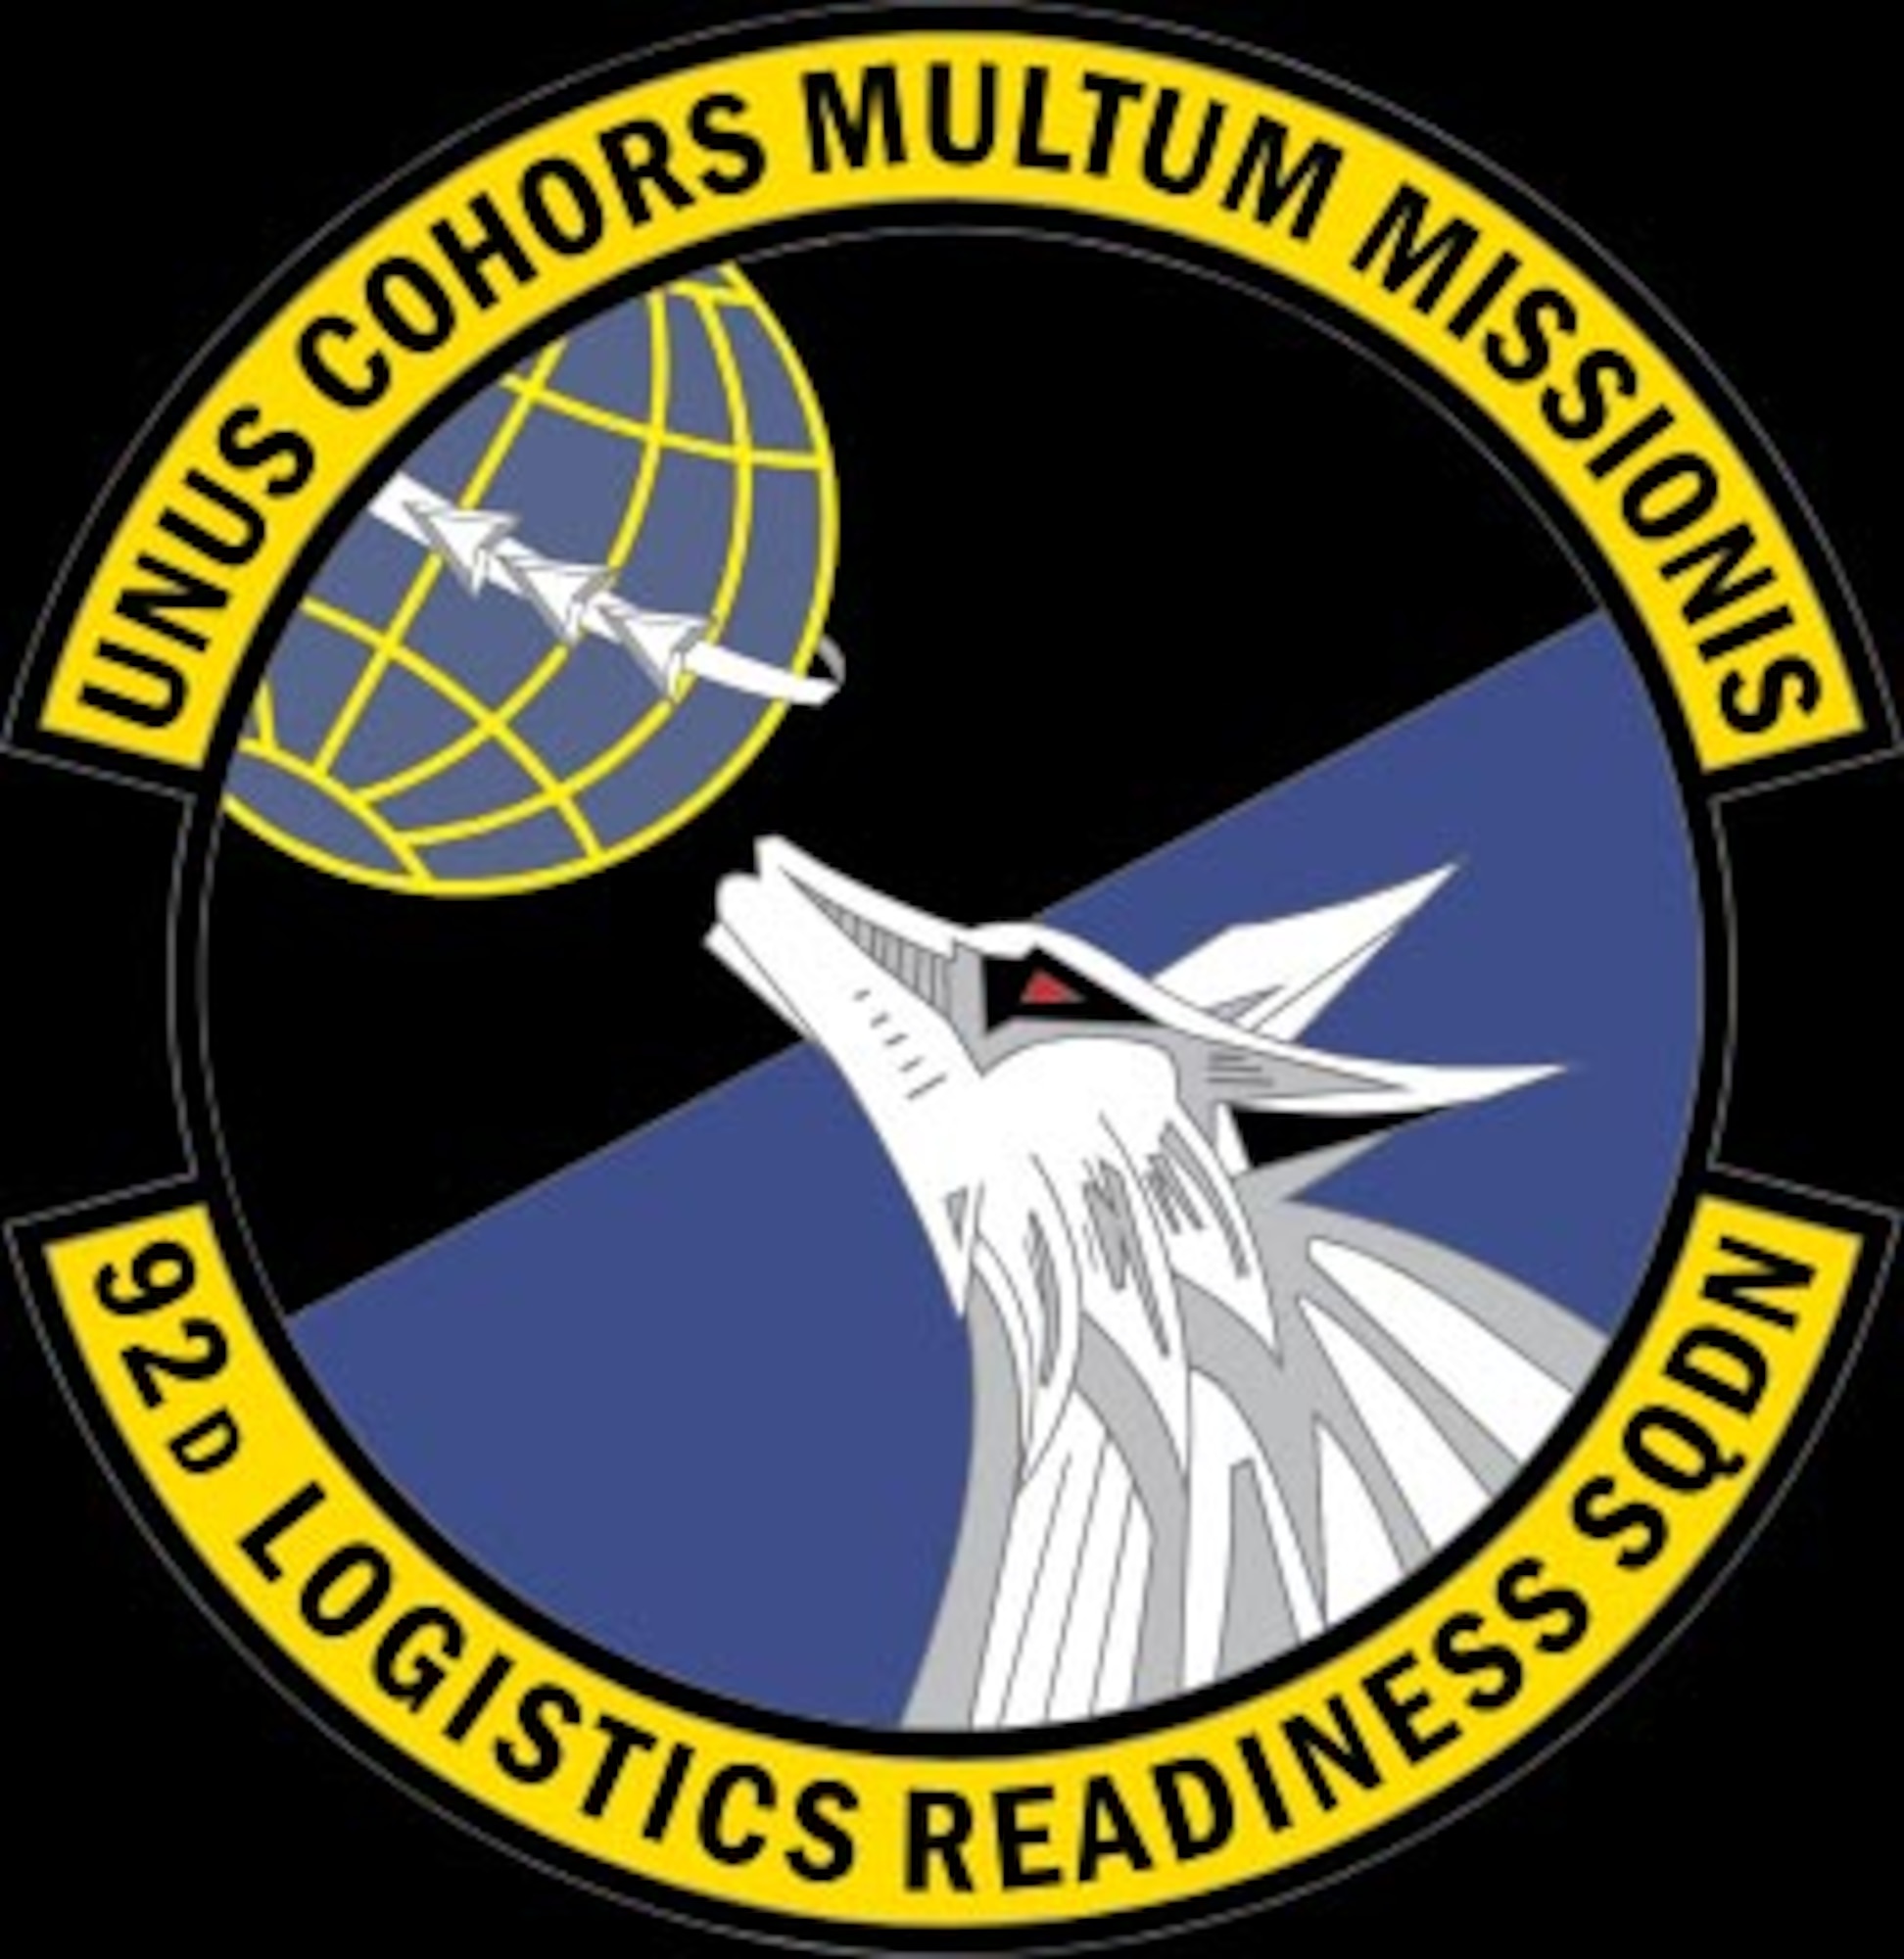 The 92nd Logistics Readiness Squadron logo. (U.S. Air Force courtesty photo)